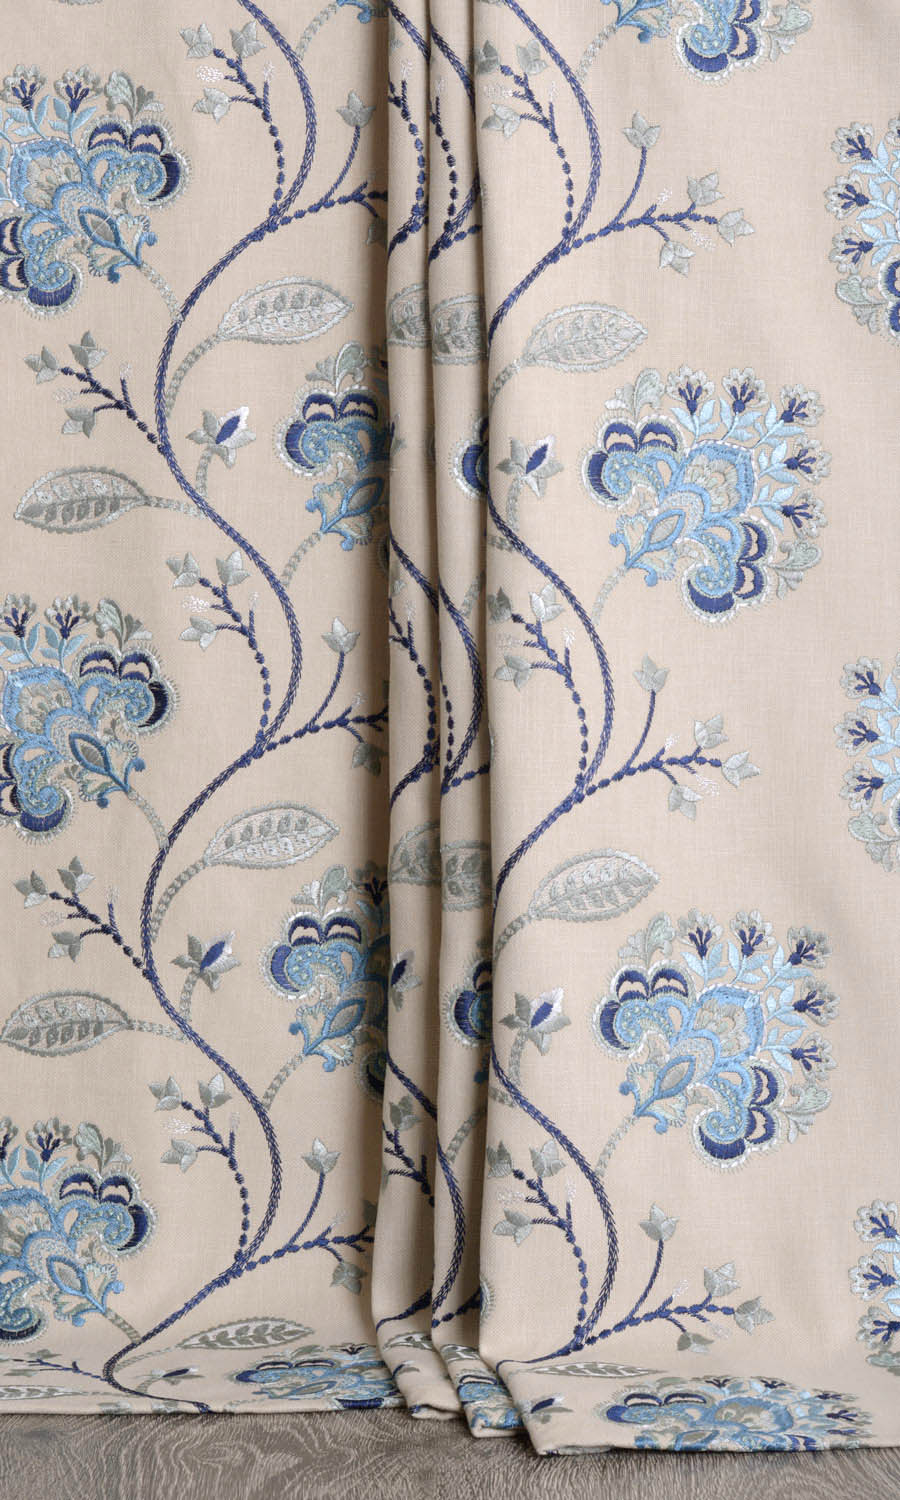 Fernista Chambray Blue Cotton 140cm Wide Curtain/Craft Fabric 